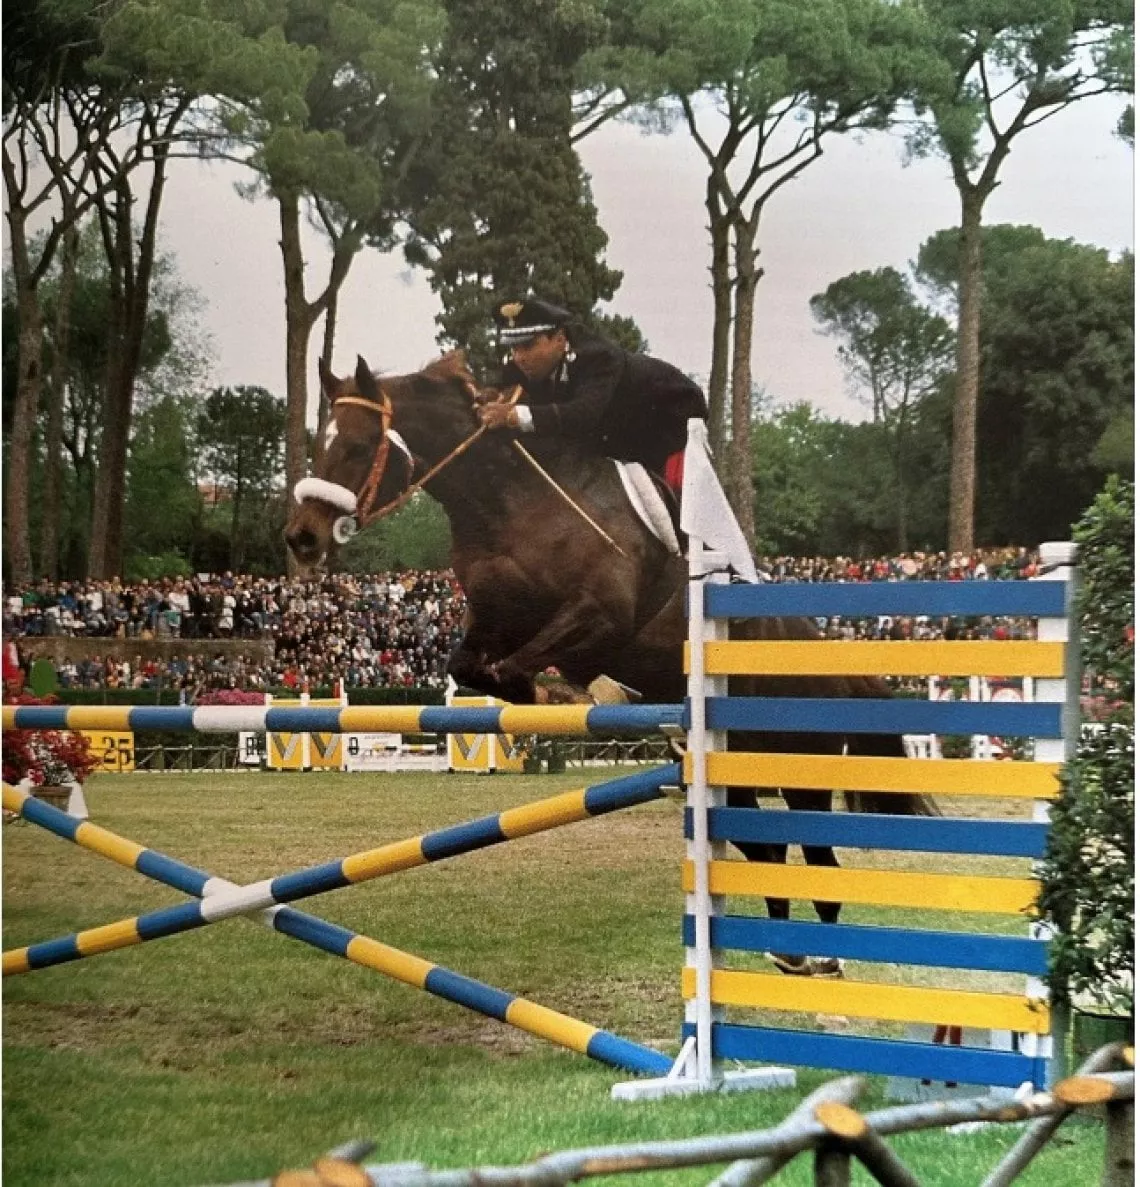 1990, Piazza di Siena, Rome, Effendi De Nora under the saddle of Giancarlo Gutierrez engaged in an international competition